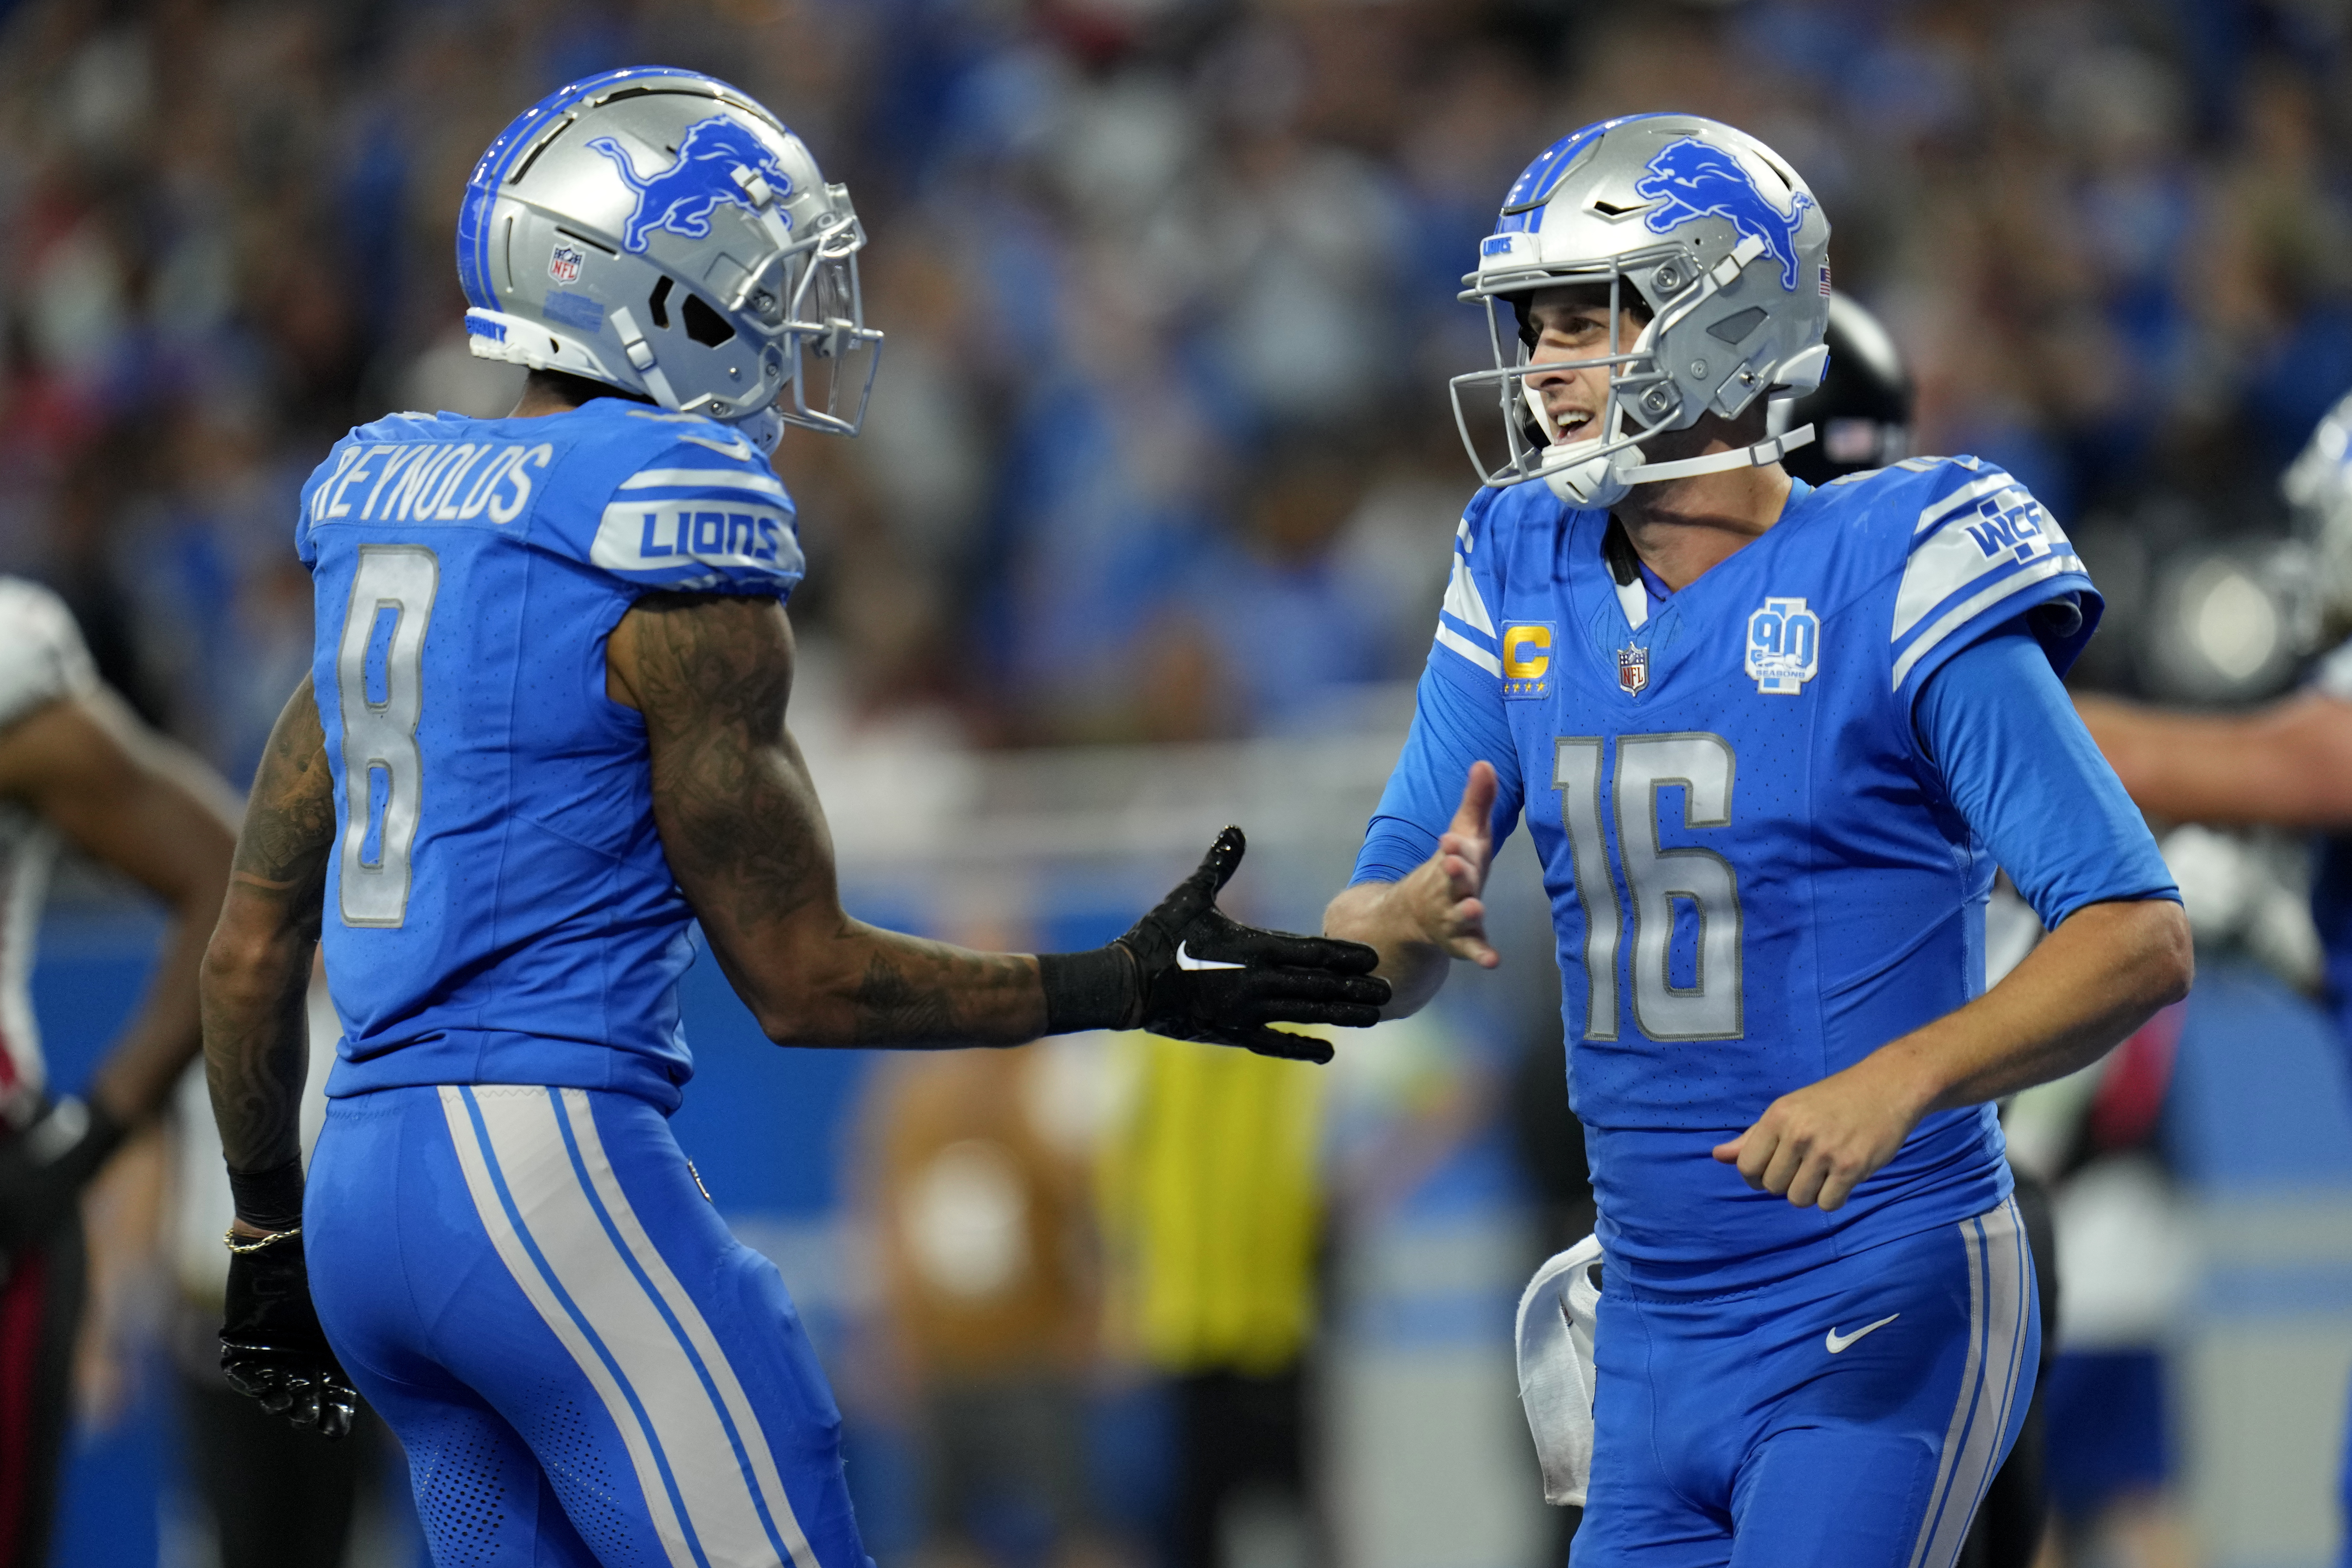 Lions vs. Packers on TNF: Odds, picks, predictions and best bets